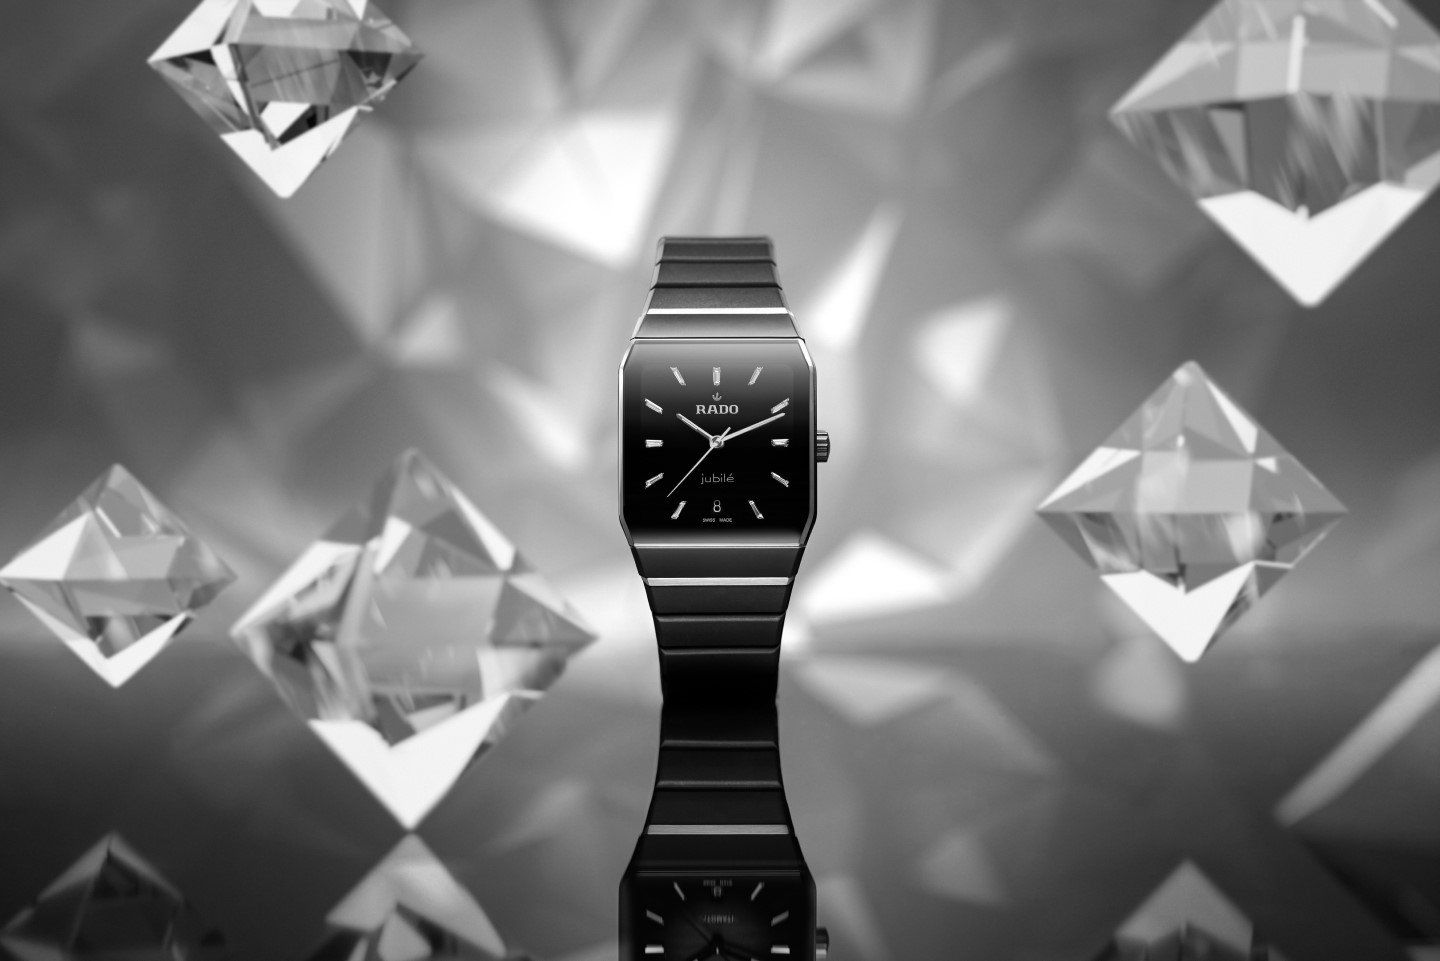 Square watches like the Anatom have been a popular feature in Rado’s portfolio since 1967